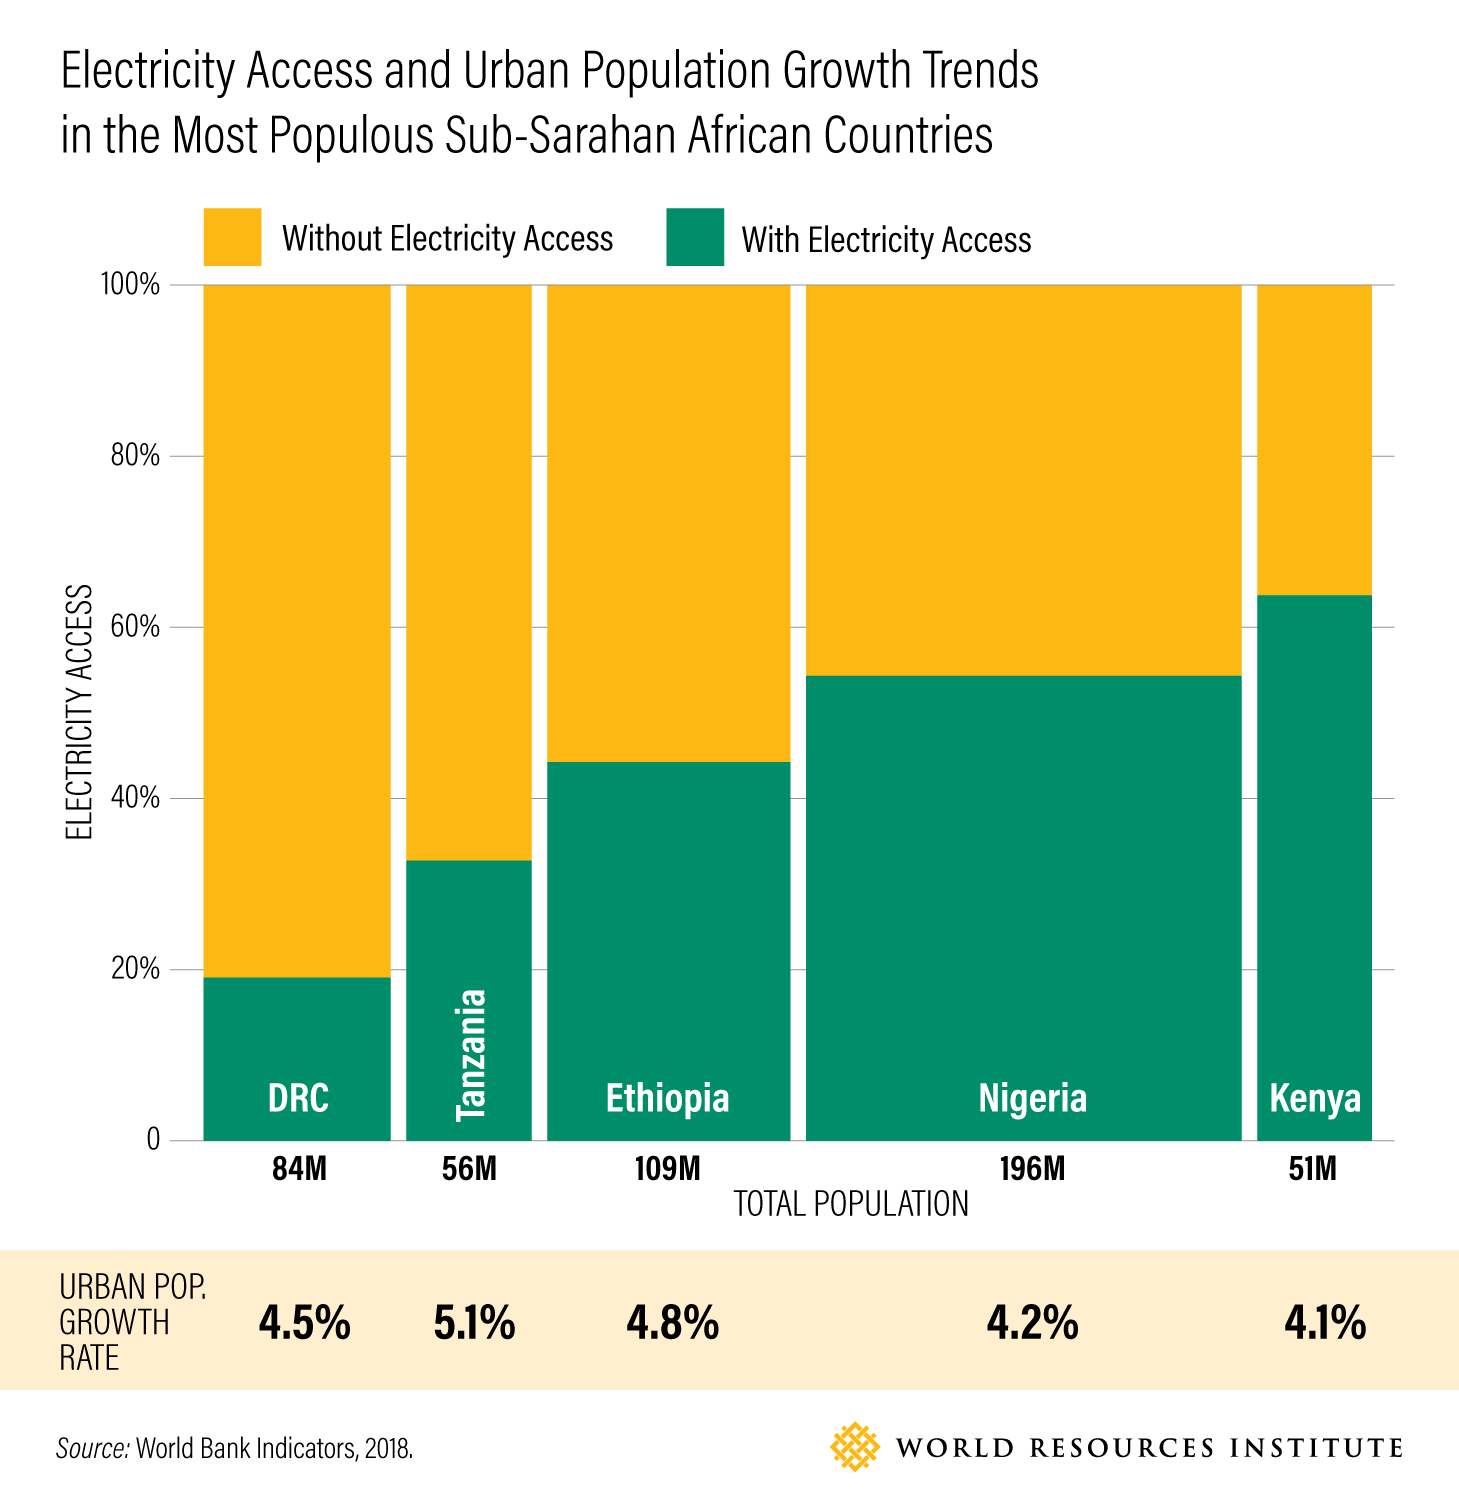 Electricity Access and Urban Population Growth Trends in the Most Populous Sub-Sarahan African Countries